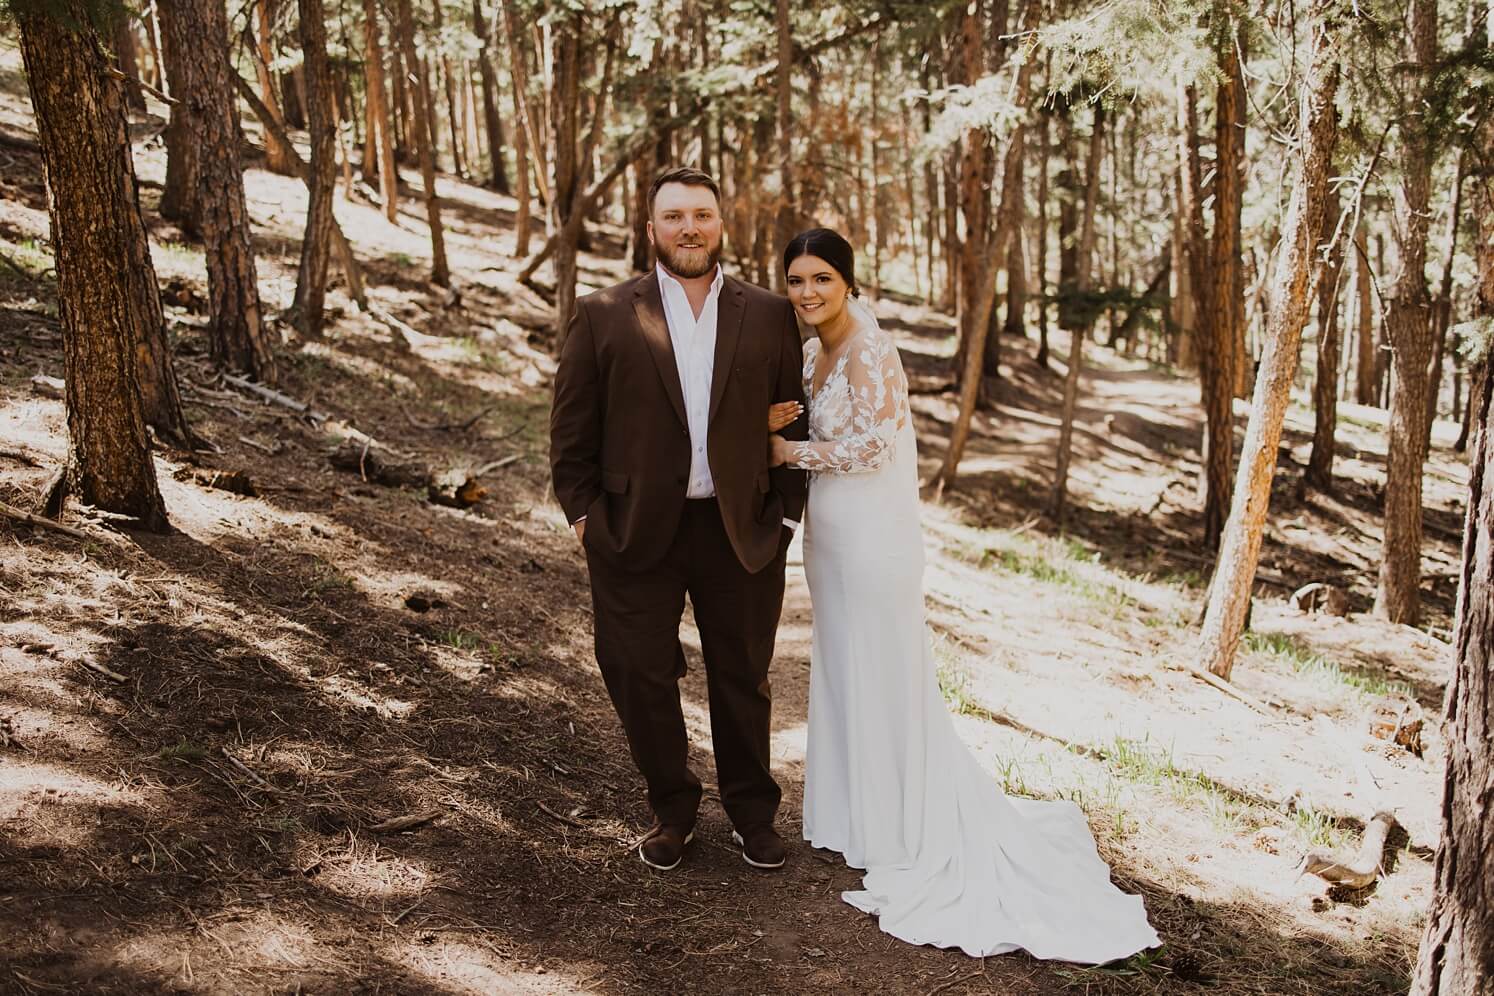 Bride and groom standing in forest at Evergreen wedding venue | McArthur Weddings and Events